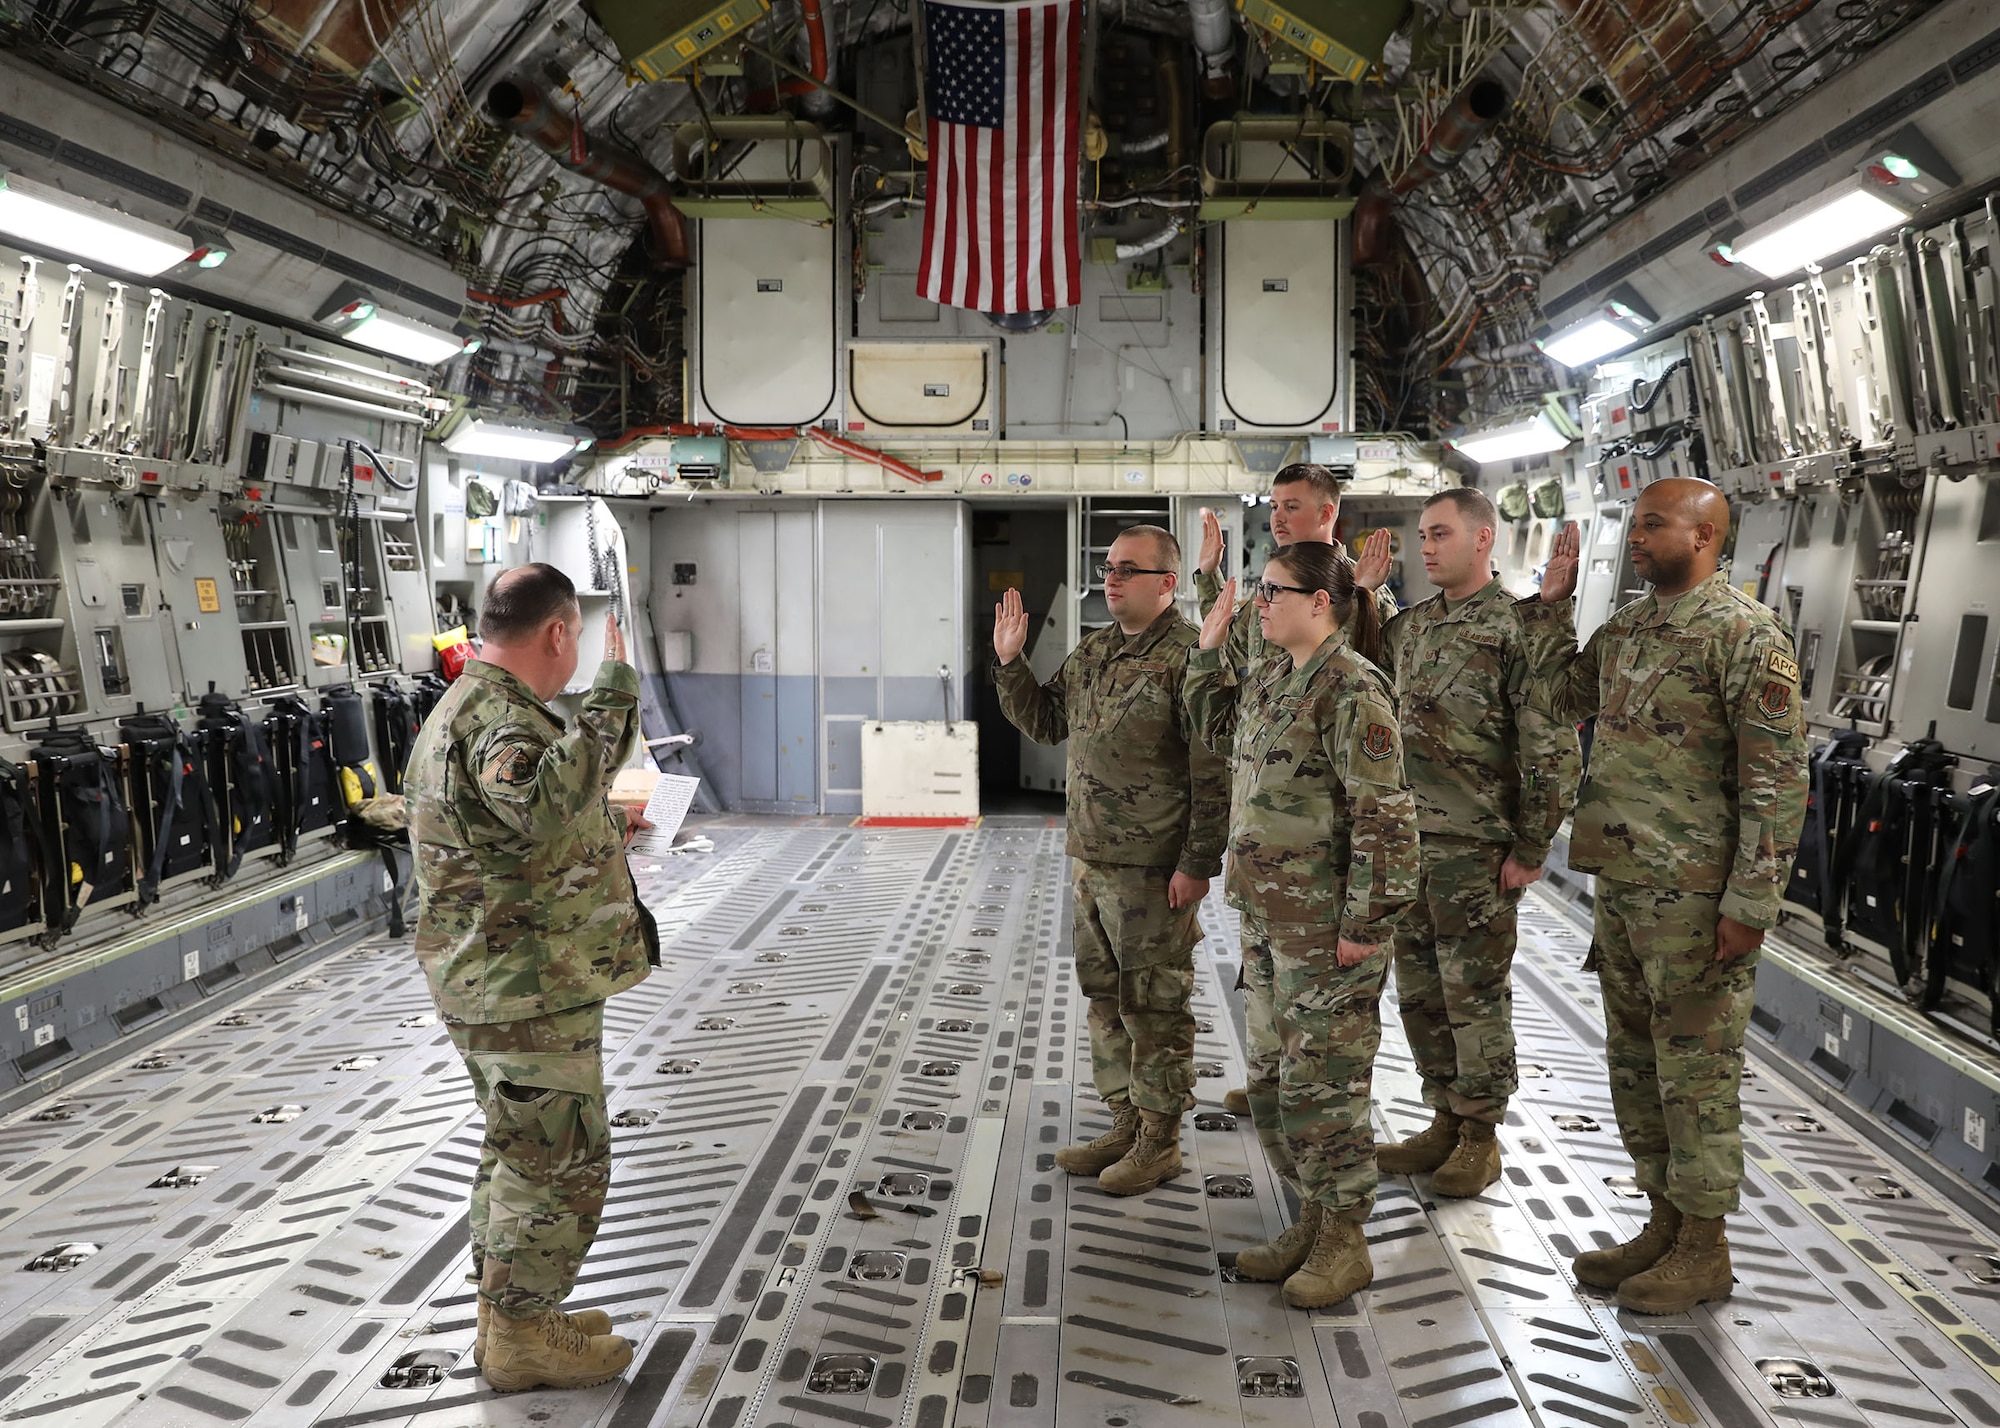 Lt. Col. Michael Shutt, the commander of the 445th Aircraft Maintenance Squadron, conducts a re-enlistment ceremony for several AMXS Airmen on March 13, 2022 at Wright-Patterson Air Force Base, Ohio. The ceremony was held in the aft section of a C-17 Globemaster III aircraft and involved the Airmen pledging additional service commitments to their country.